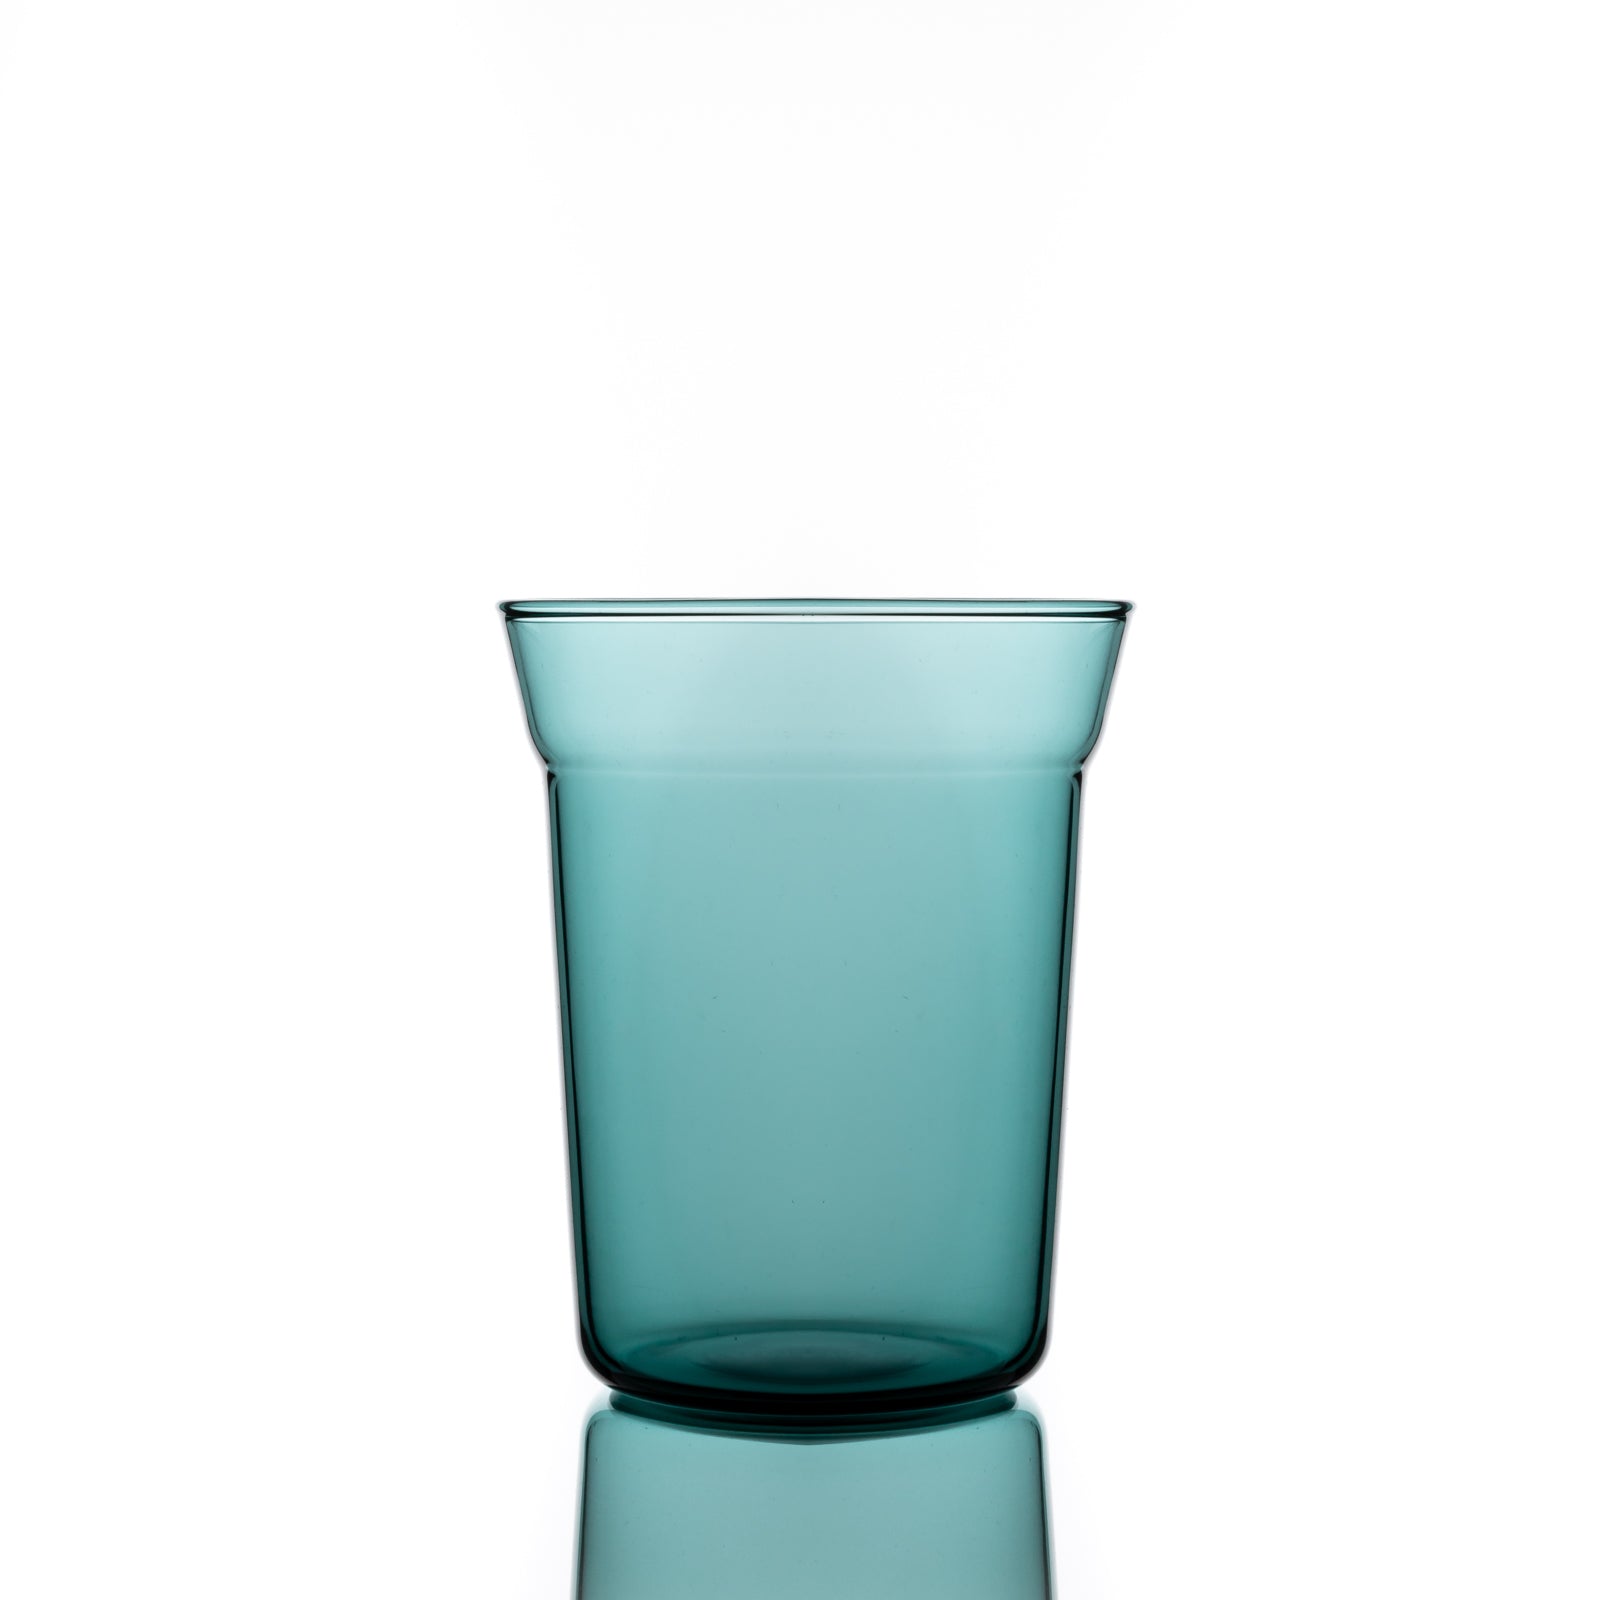 Teal Angle Taper Dof Tumblers by Bomshbee